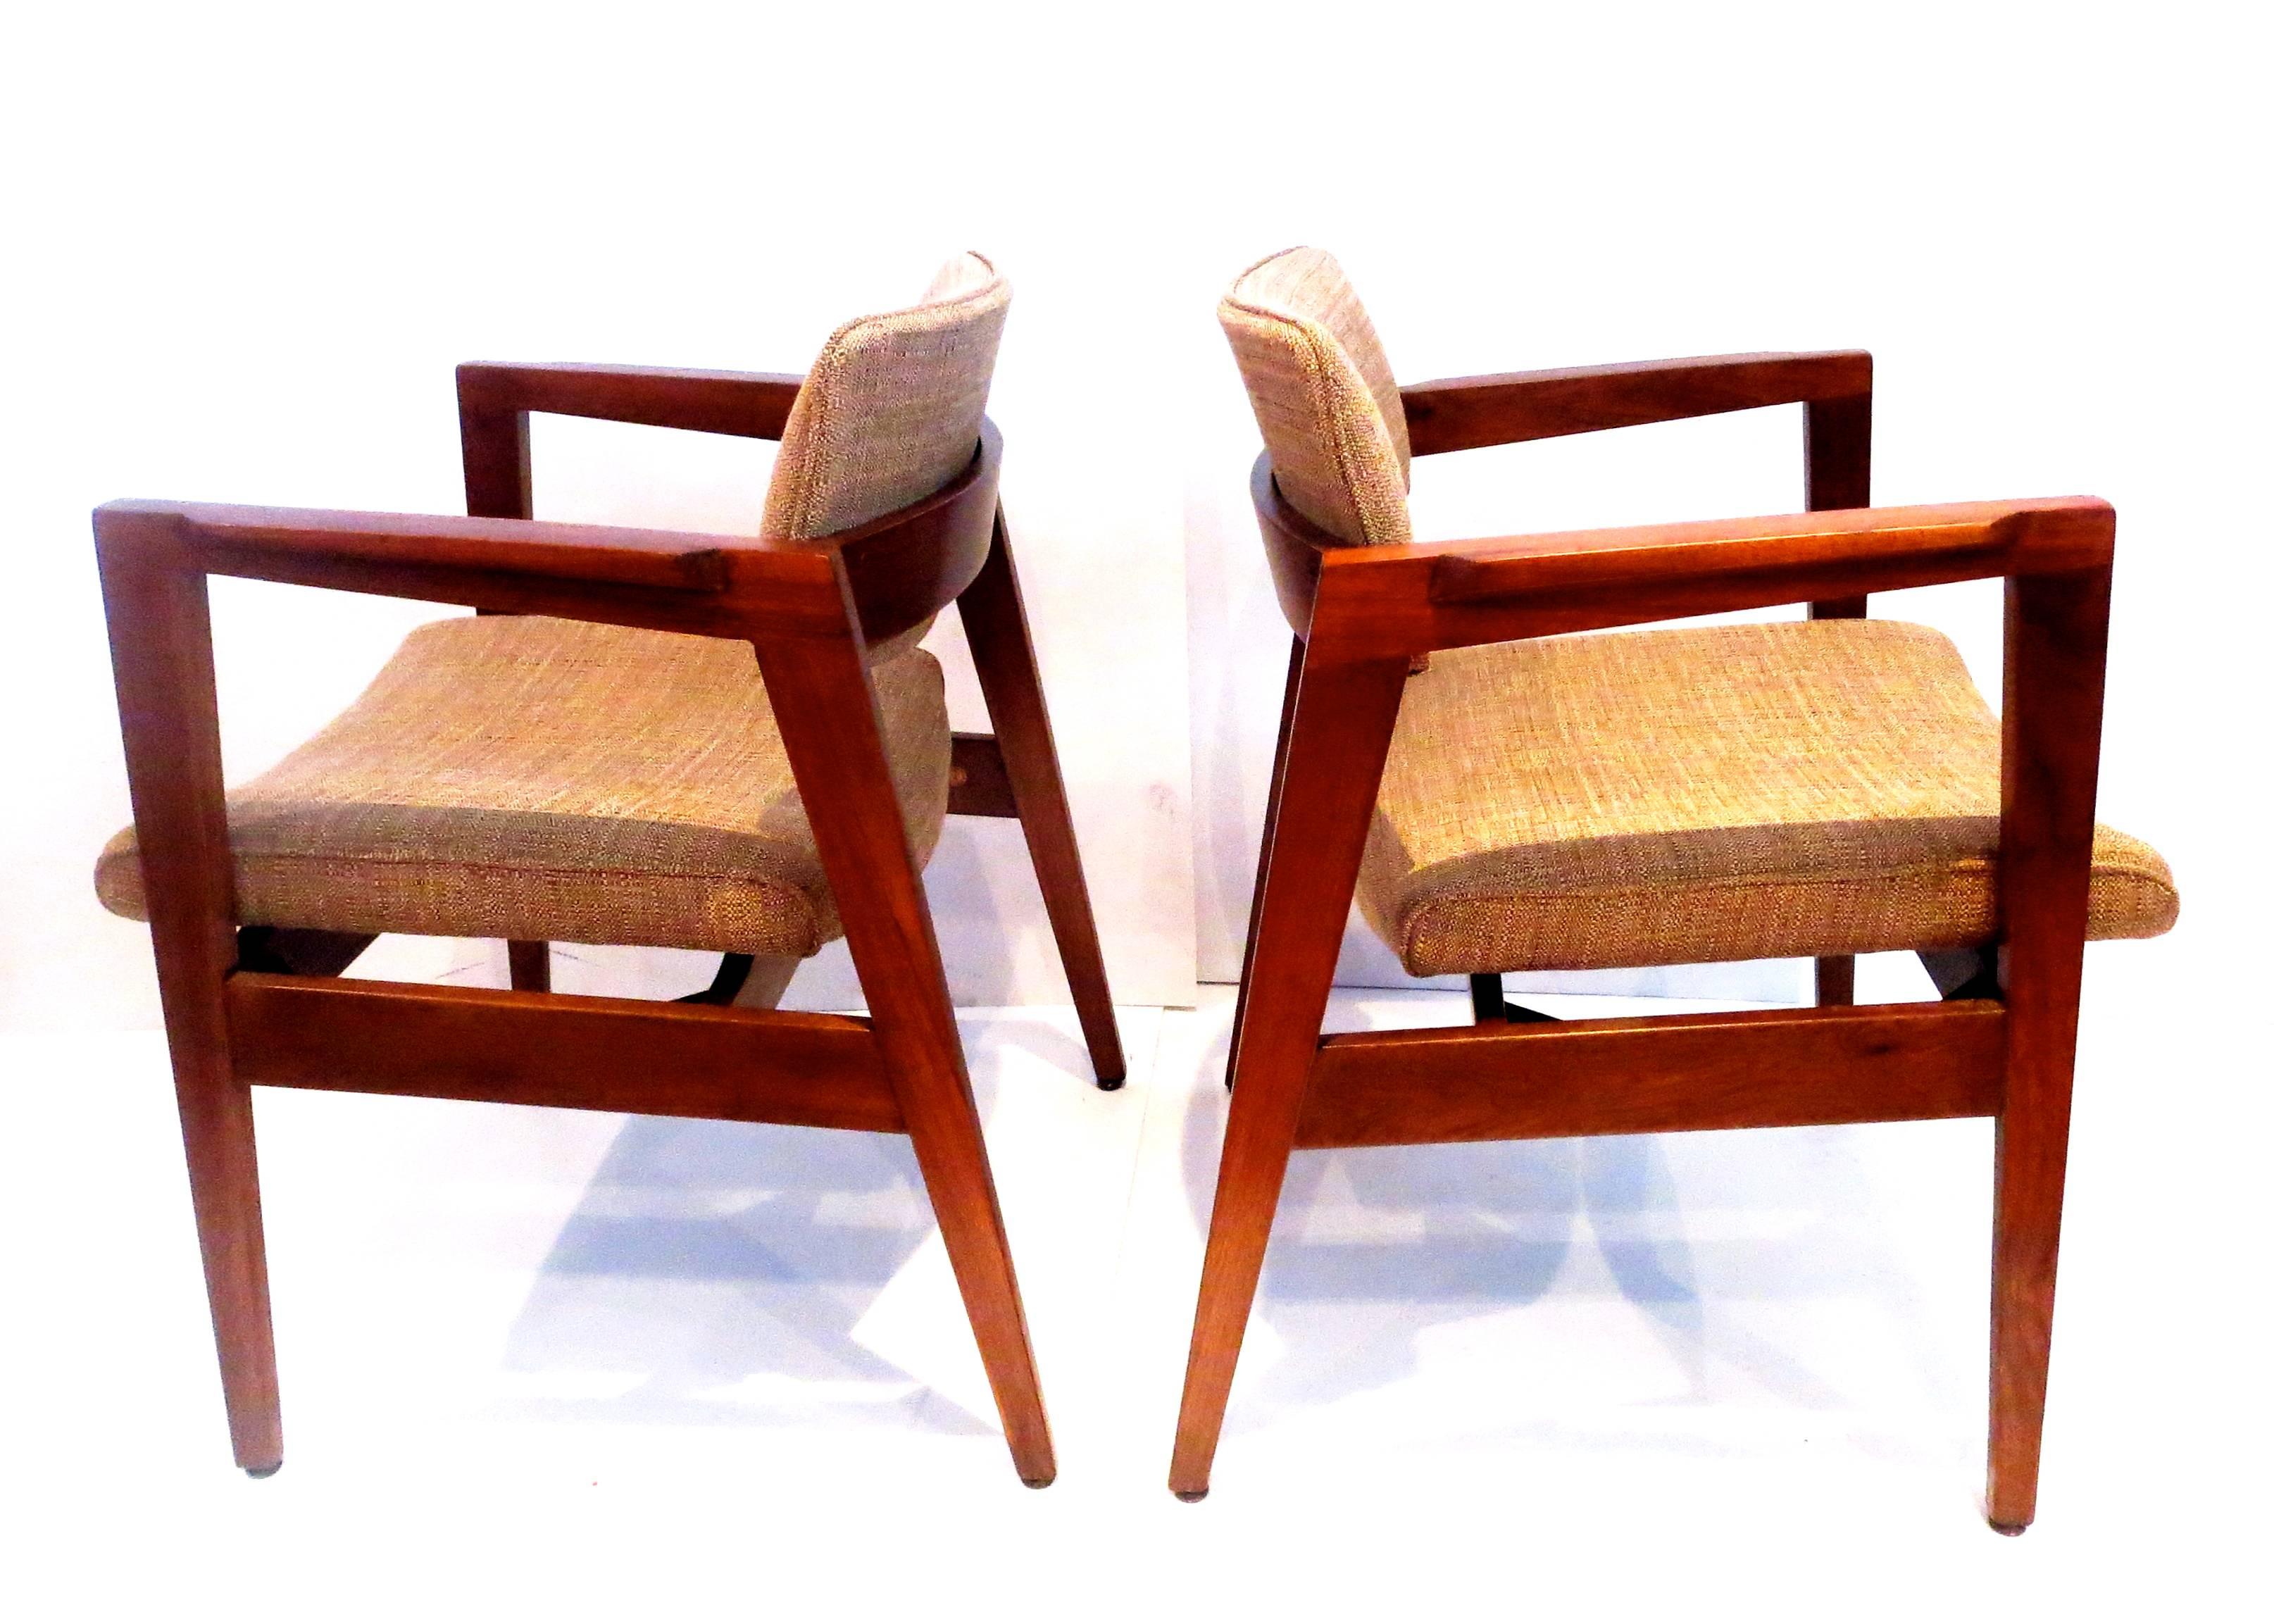 Striking elegant 1950s solid walnut frame armchairs by Gunlocke Chair Company, the chairs have been refinished and recover in brown fabric, solid and sturdy great lines.